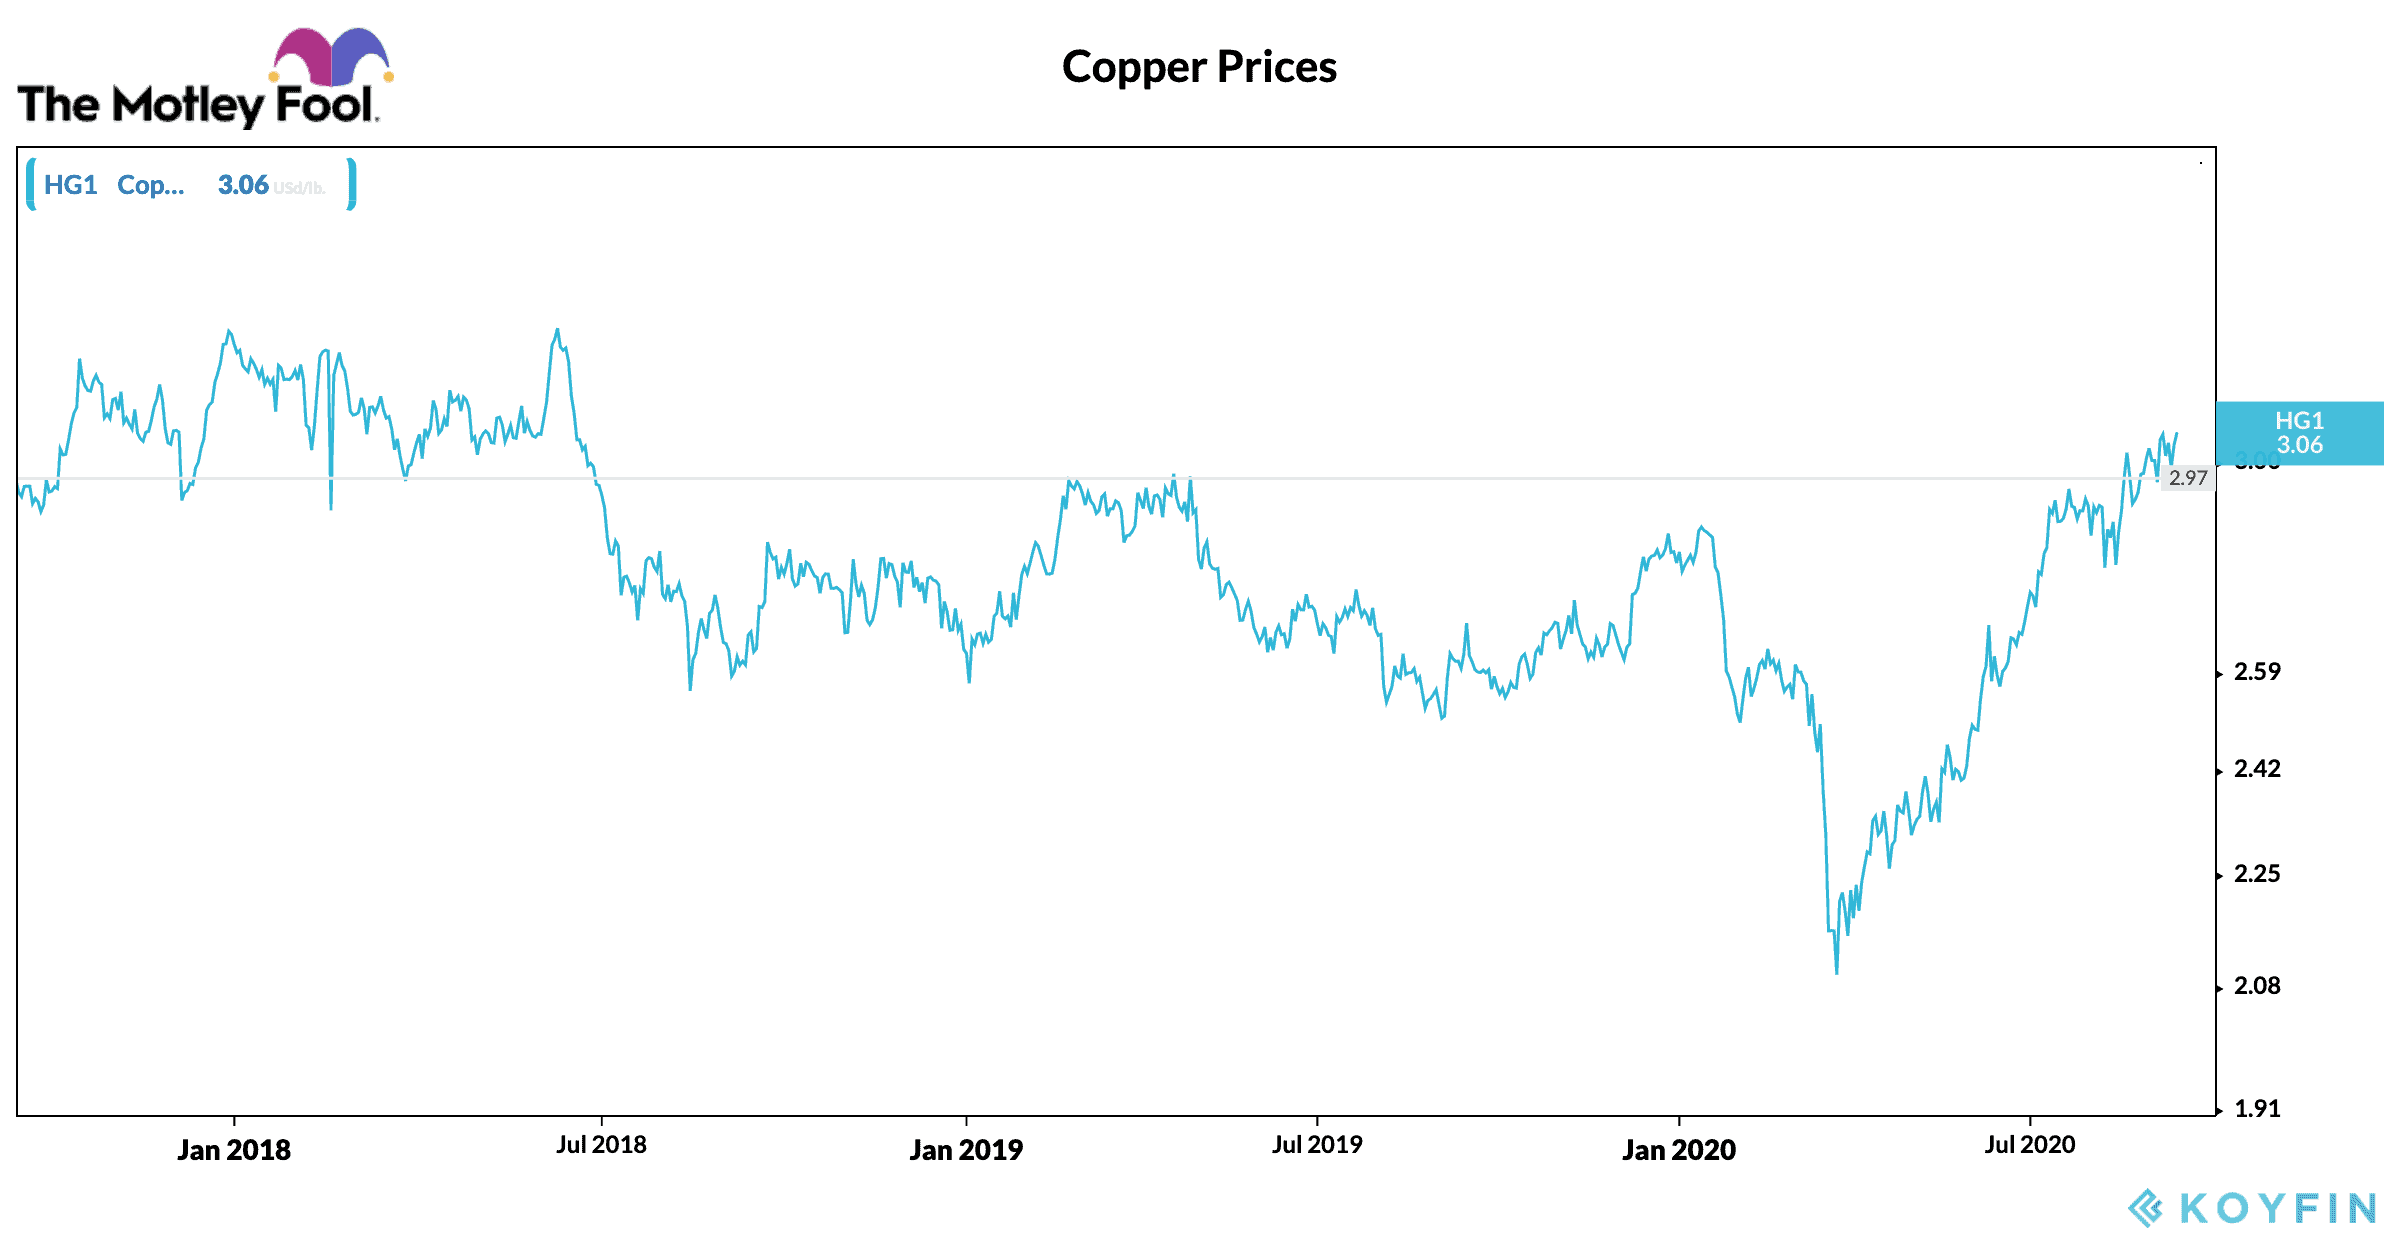 koyfin chart showing historical copper prices up to September 2020